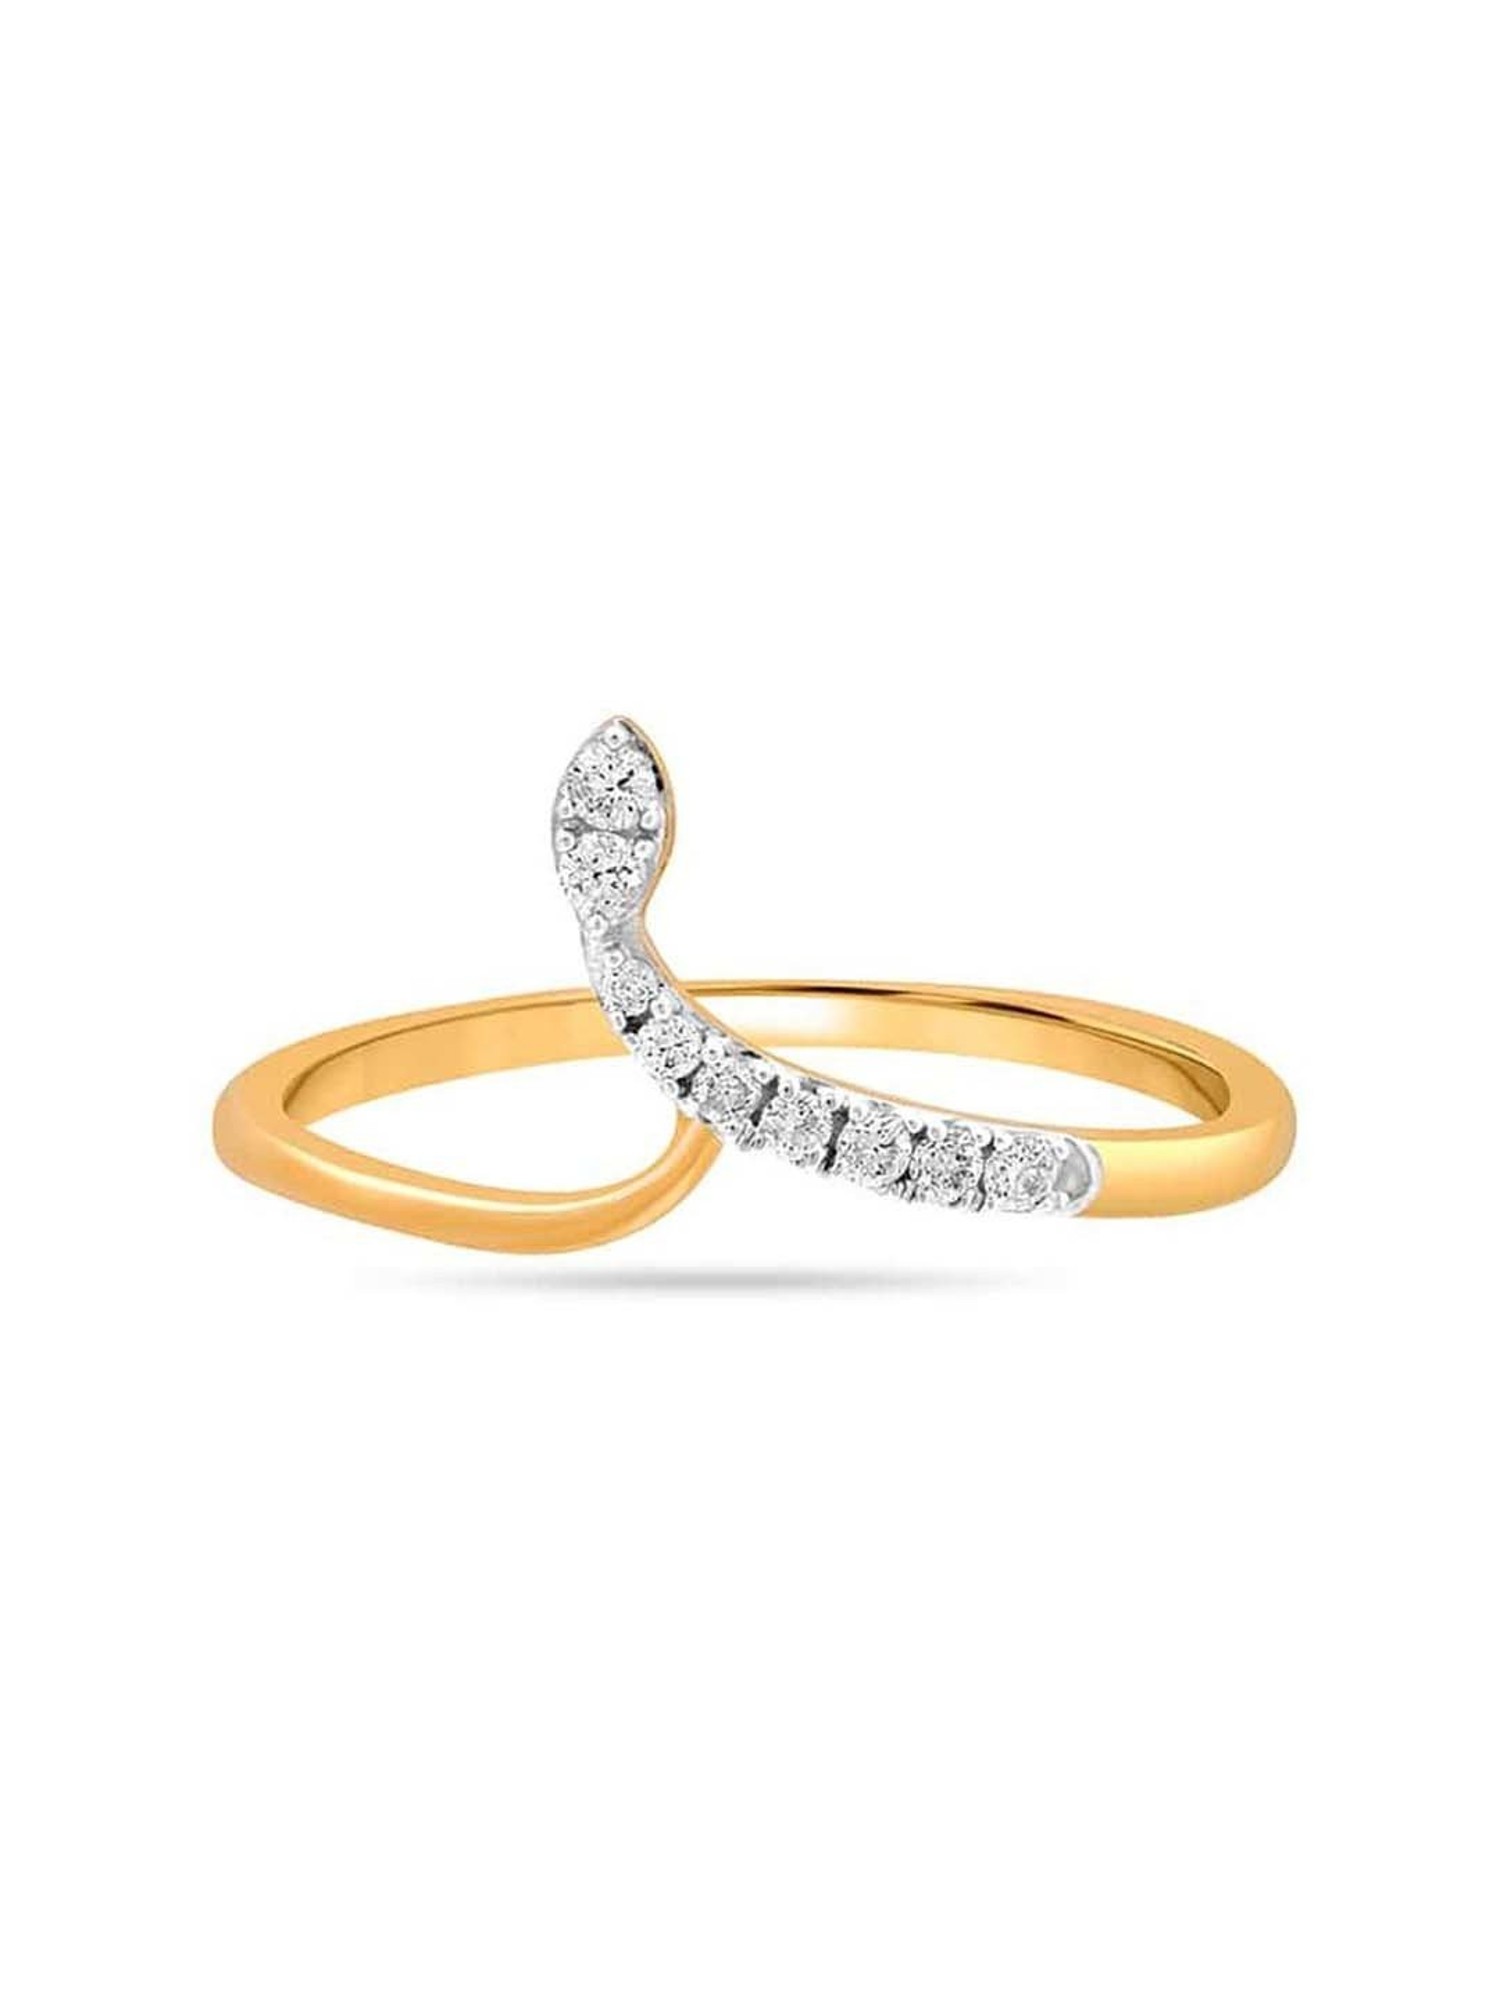 Delightful 18 Karat Yellow Gold And Diamond Floral Ring